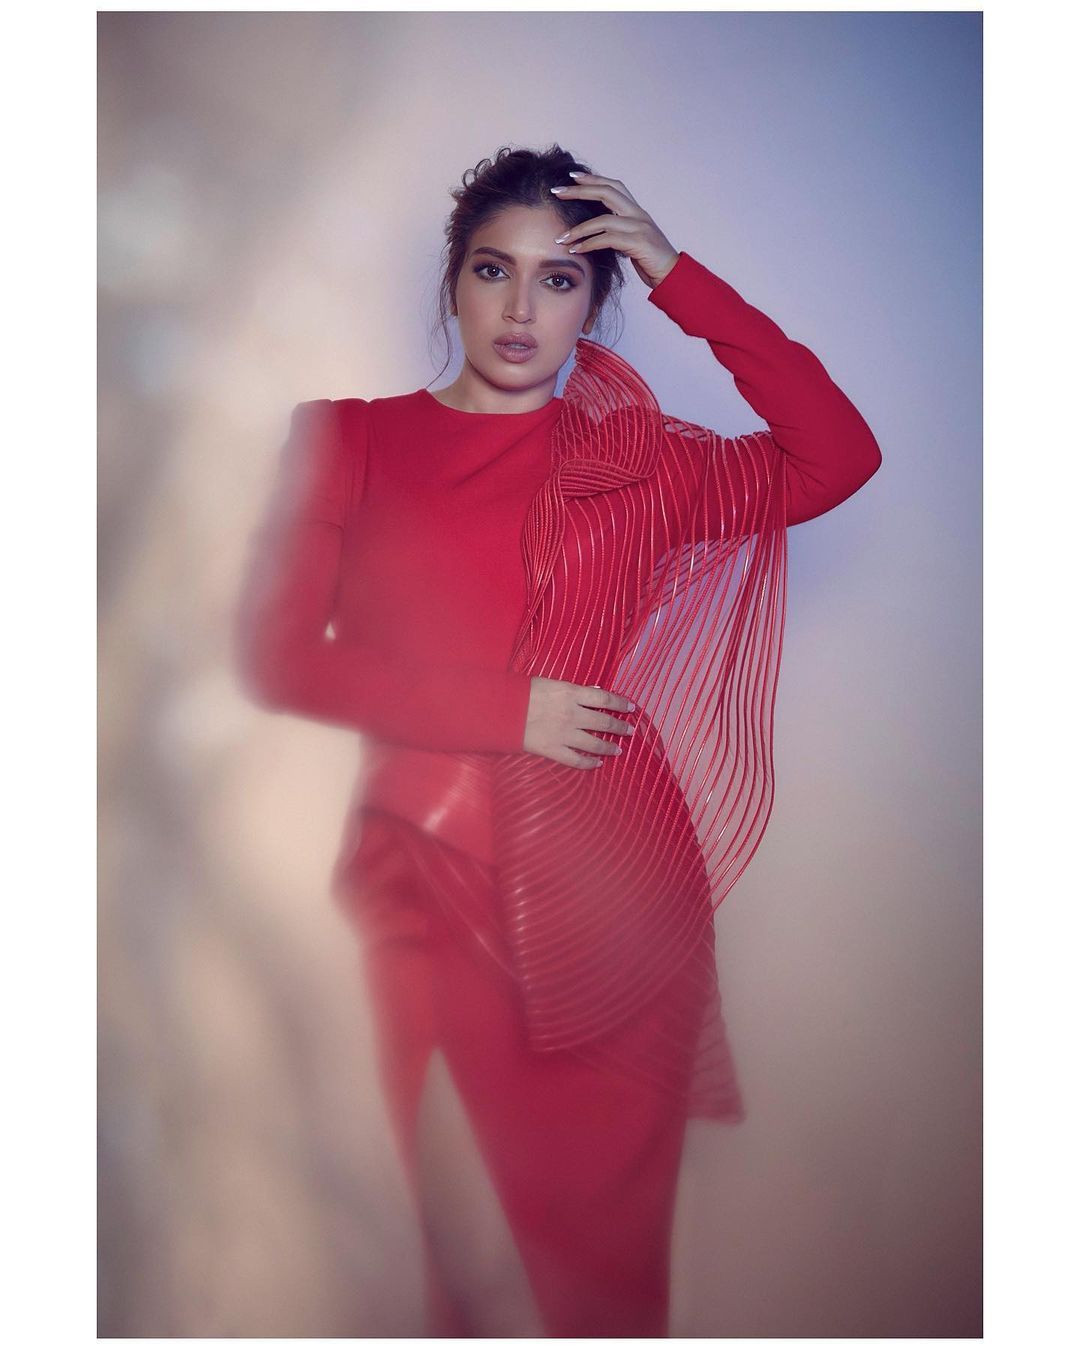 Bhumi Pednekar Wants To Change The Definition Of A Quintessential Bollywood Actress, Will Set Her Own Beauty Standards 